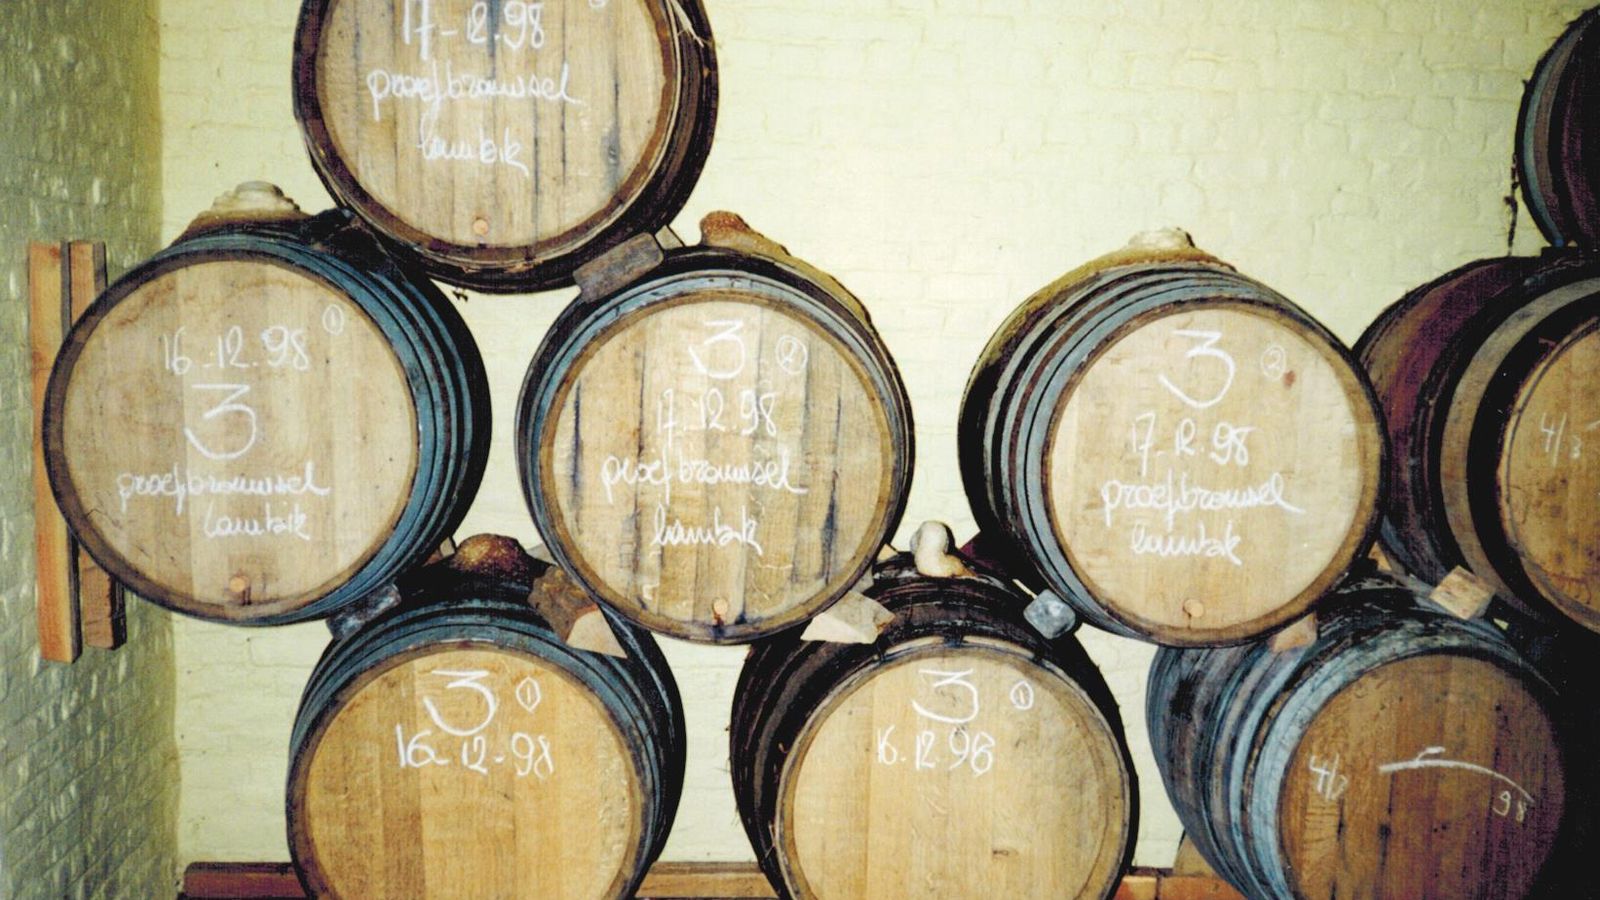 The first barrels with 3 Fonteinen brewed lambic, and with Armand typical barrel mark writing.